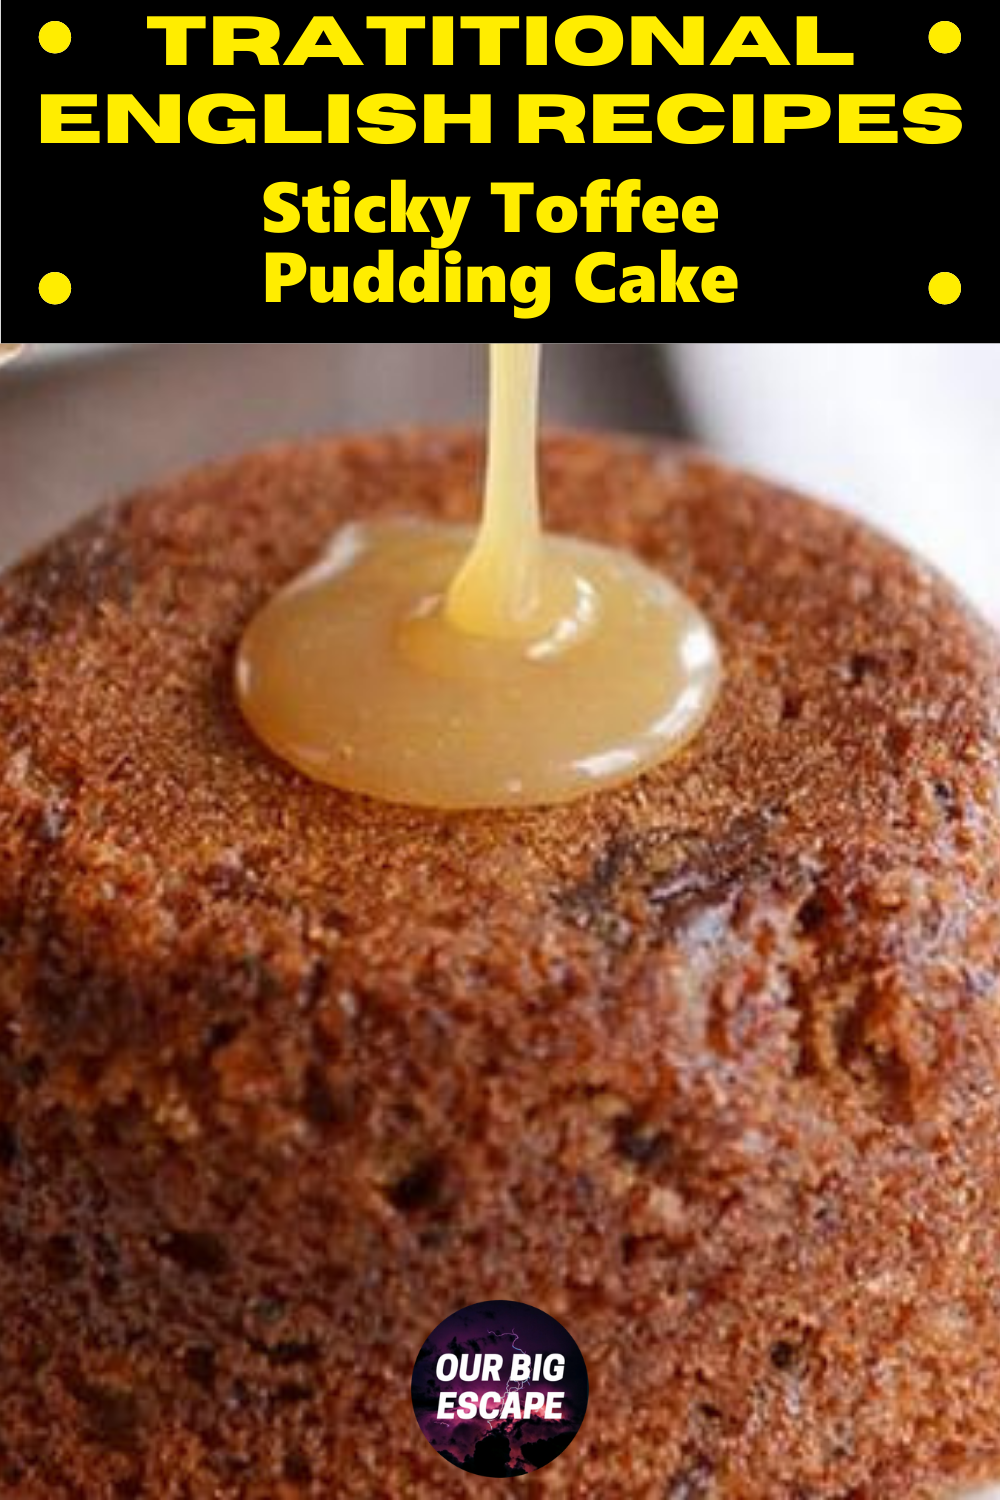 Traditional English Recipe for Sticky TOffee Pudding Cake